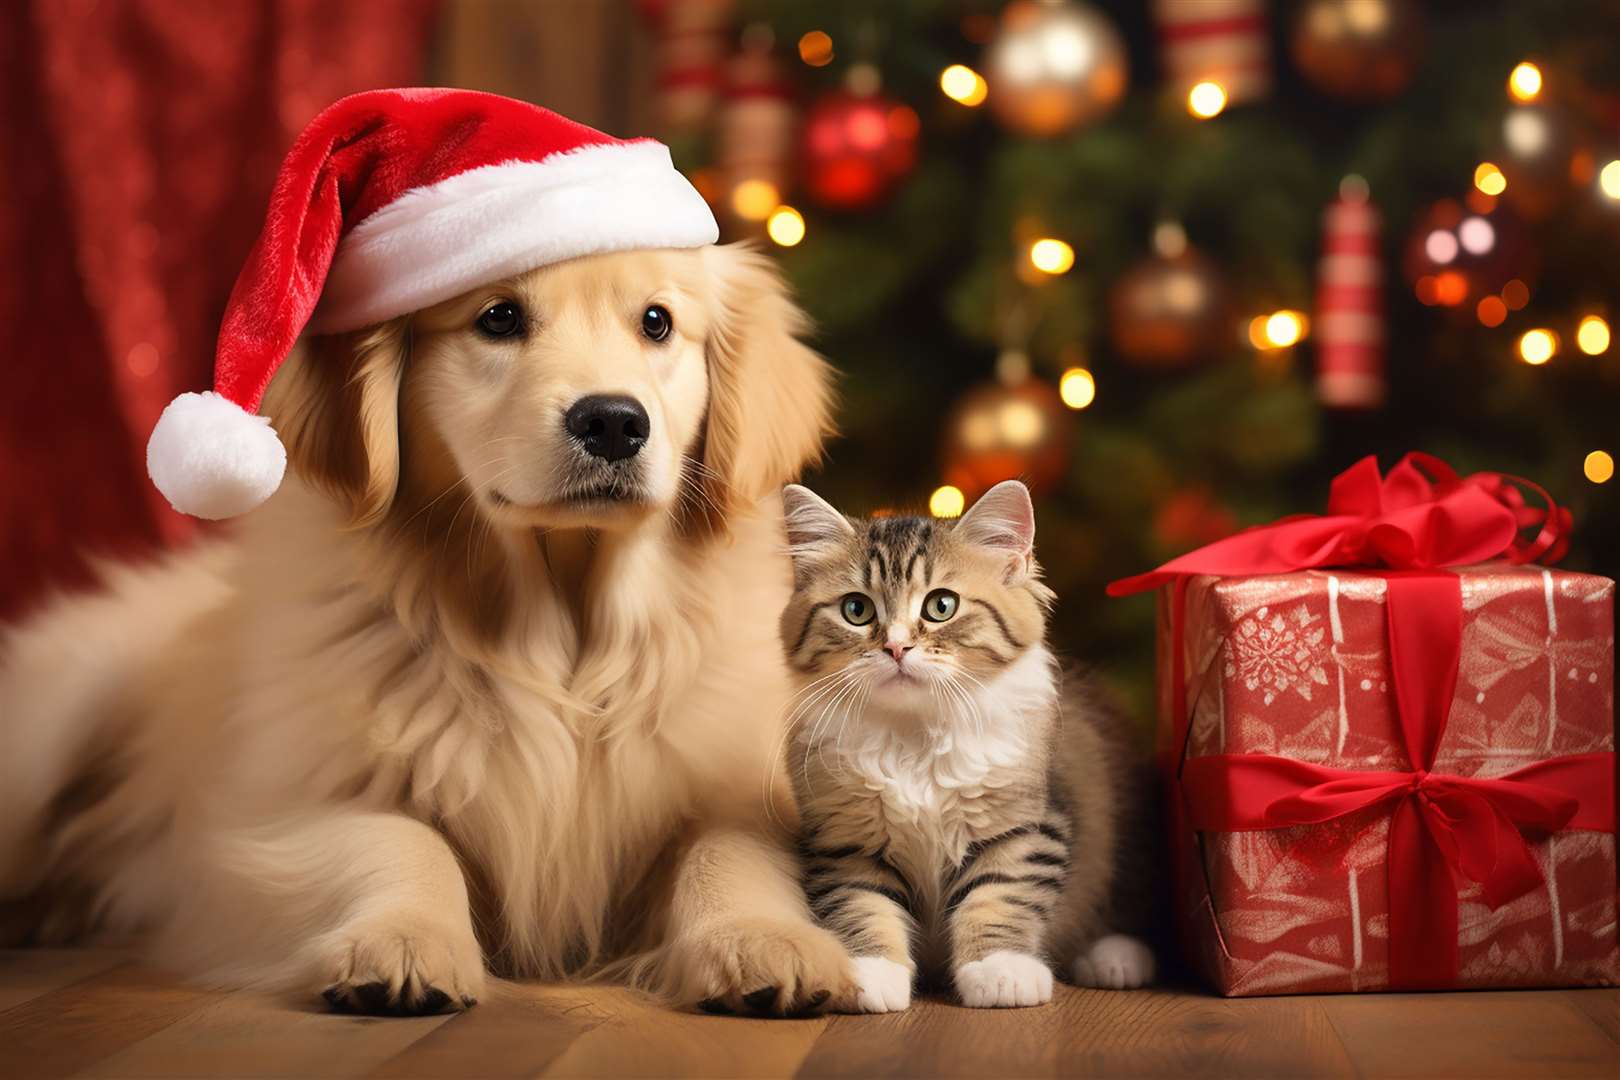 Make sure Christmas is a happy time for your pets.